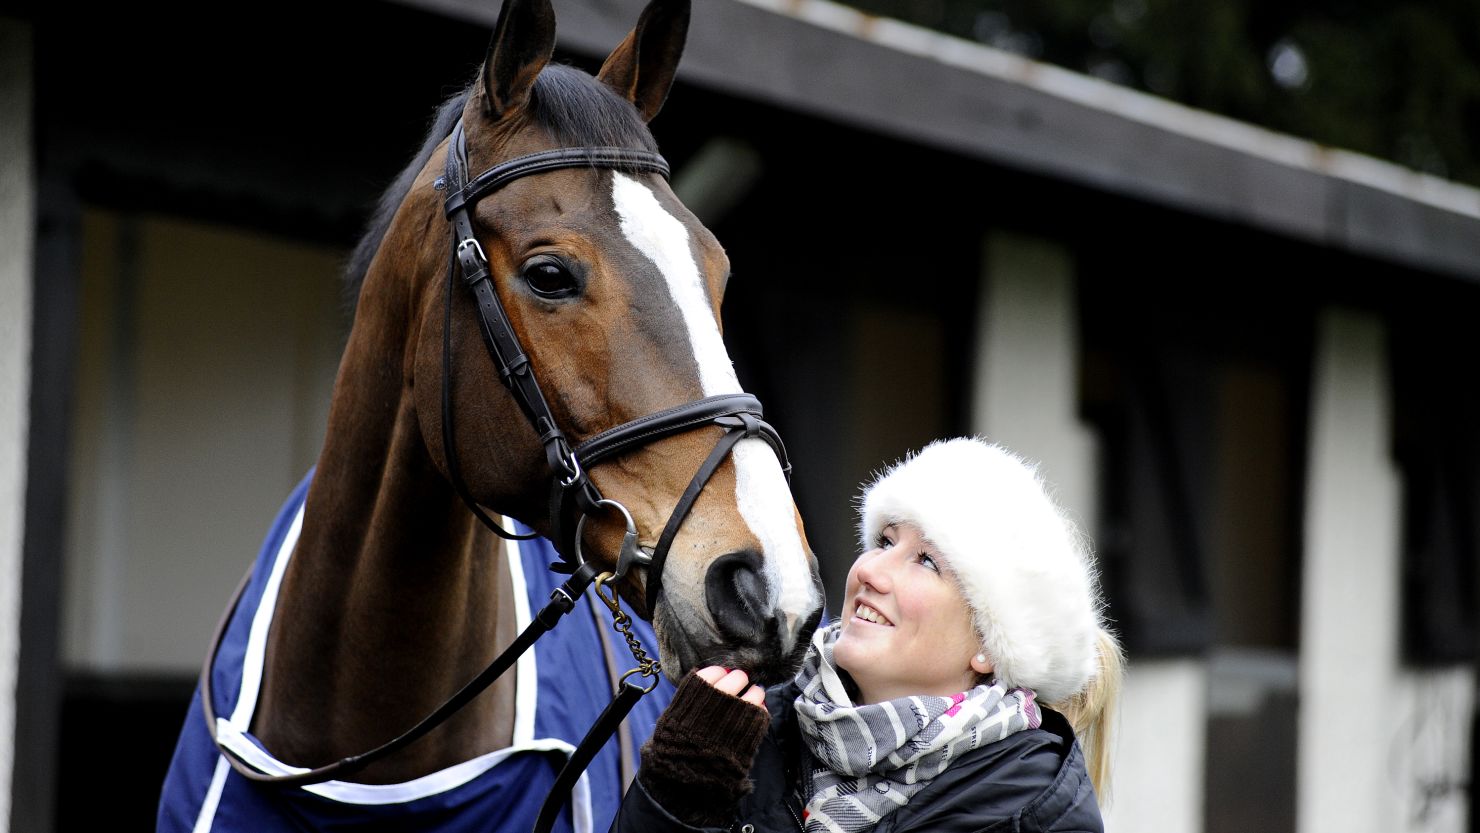 SUNBURY, ENGLAND - DECEMBER 26: Three day eventer Laura Collett with ex racehorse Kauto Star at Kempton Park racecourse on December 26, 2013 in Sunbury, England. (Photo by Alan Crowhurst/Getty Images)